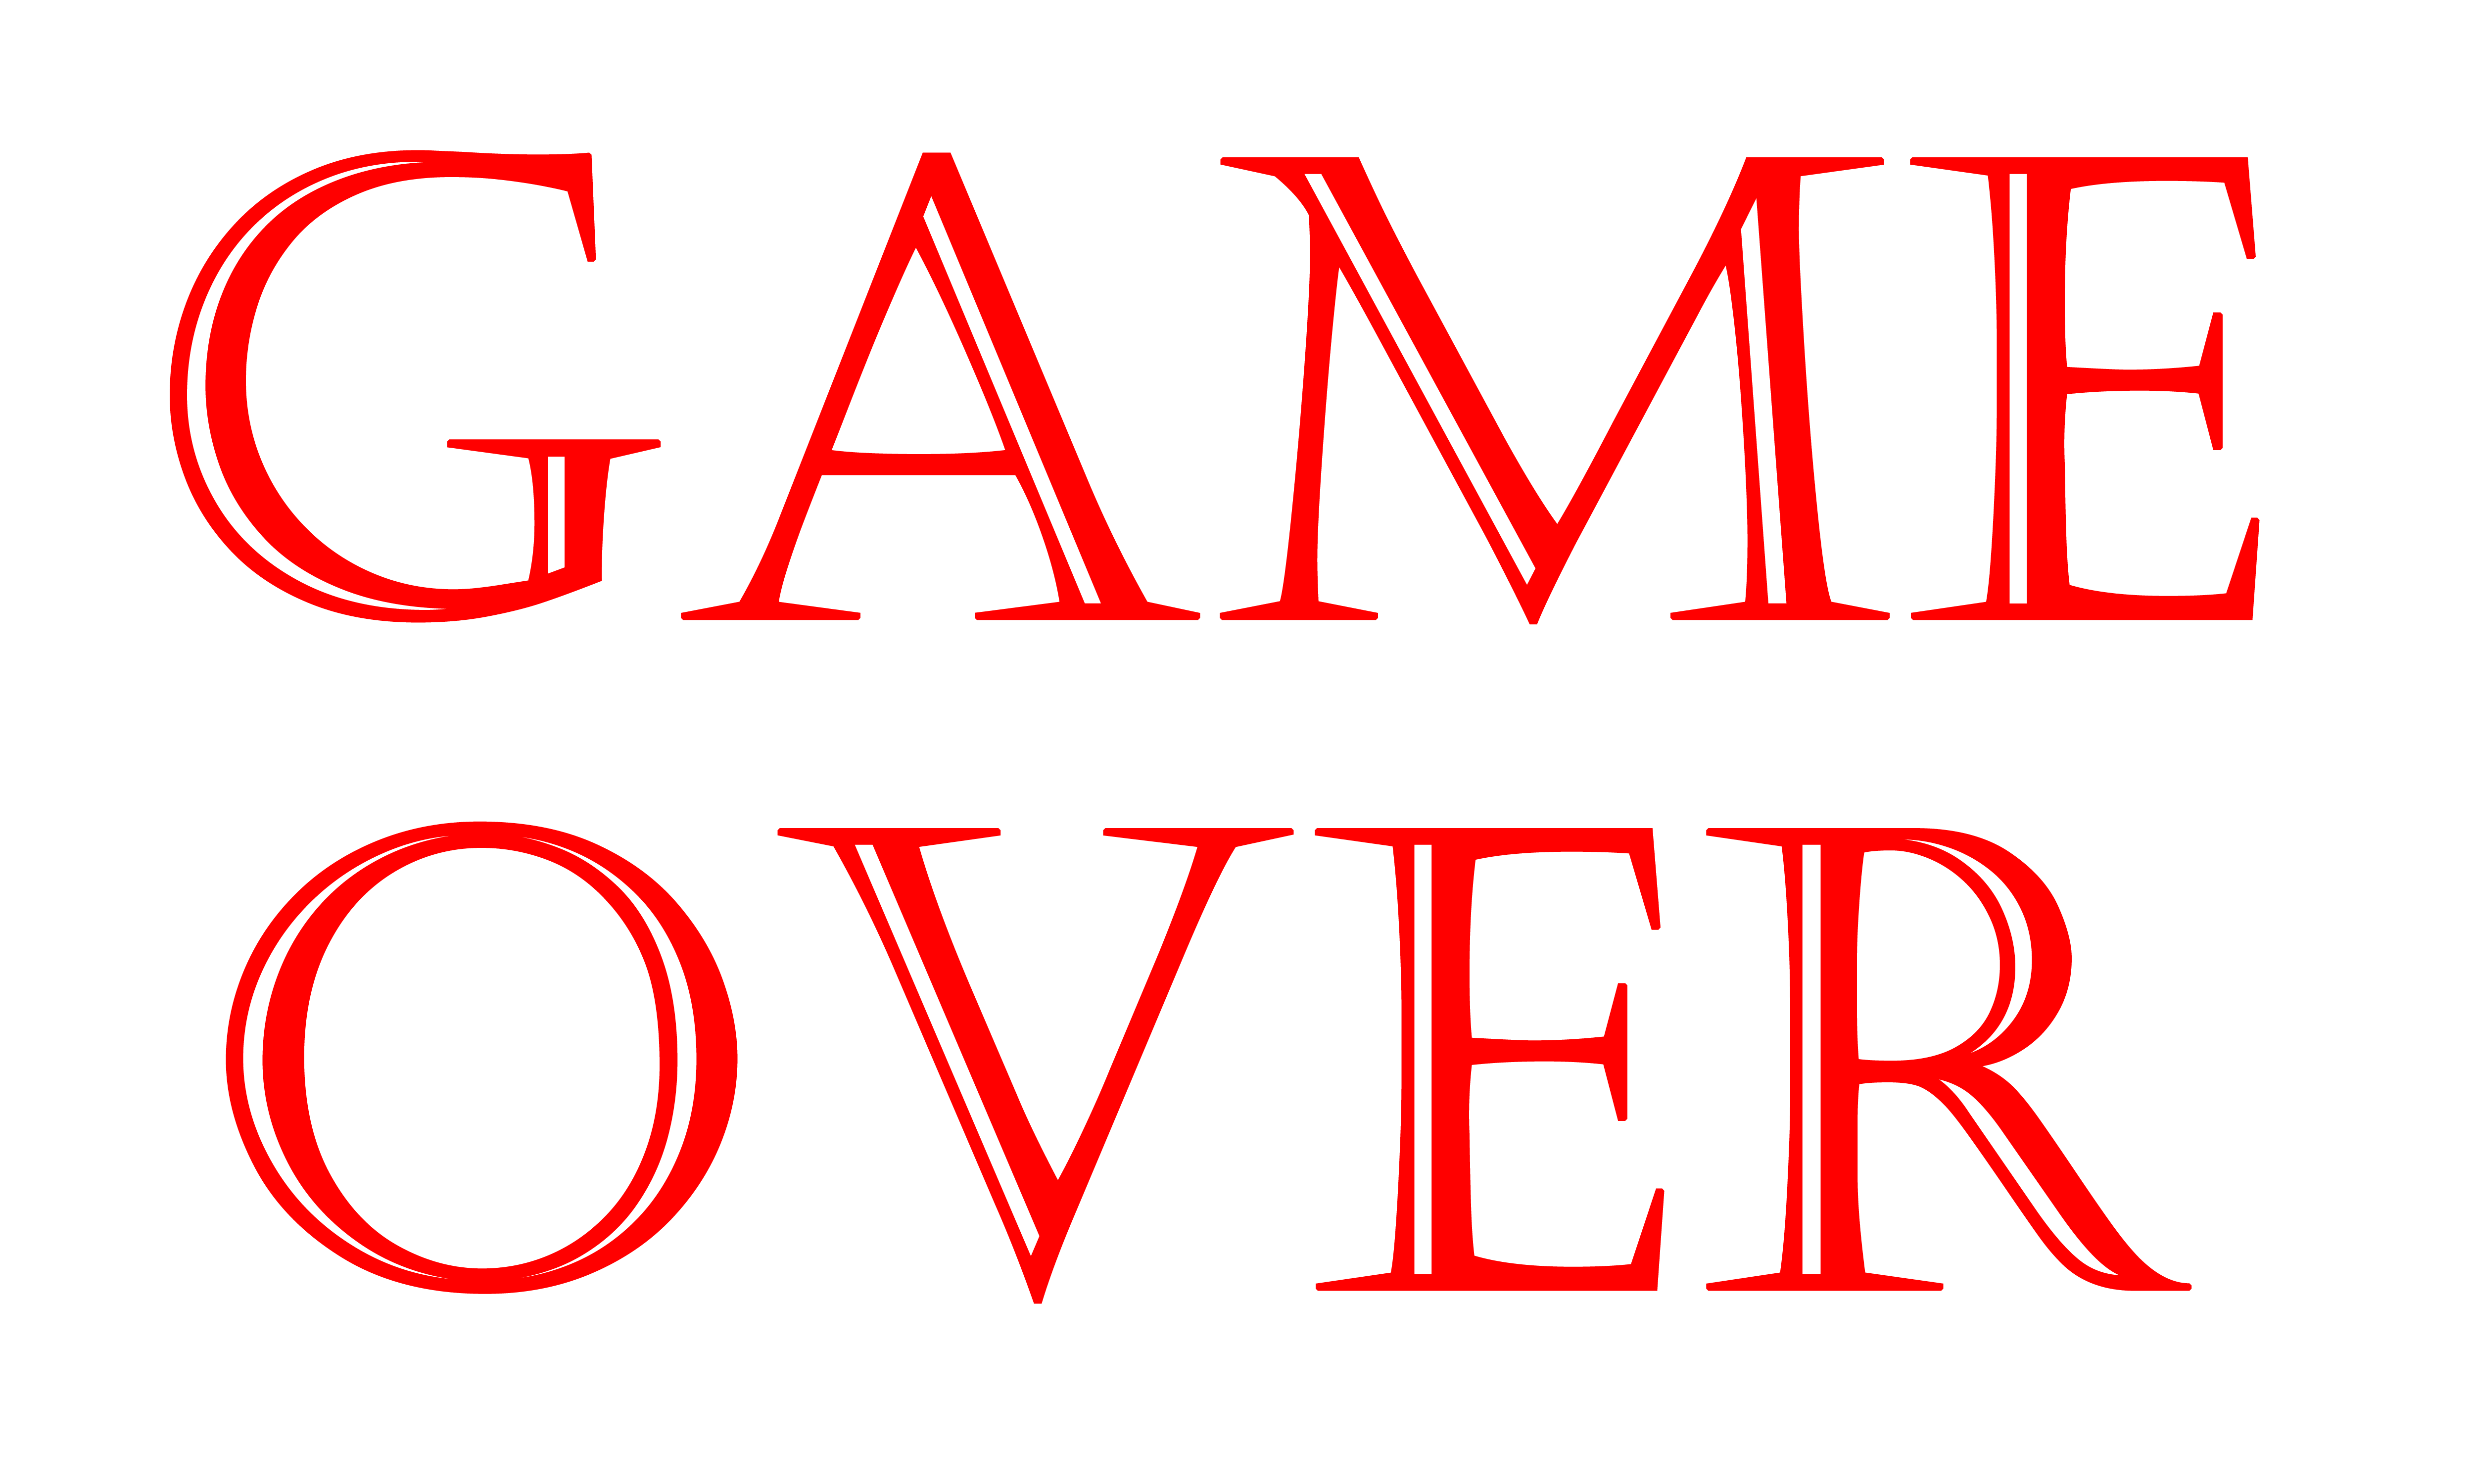 Game Over Background PNG